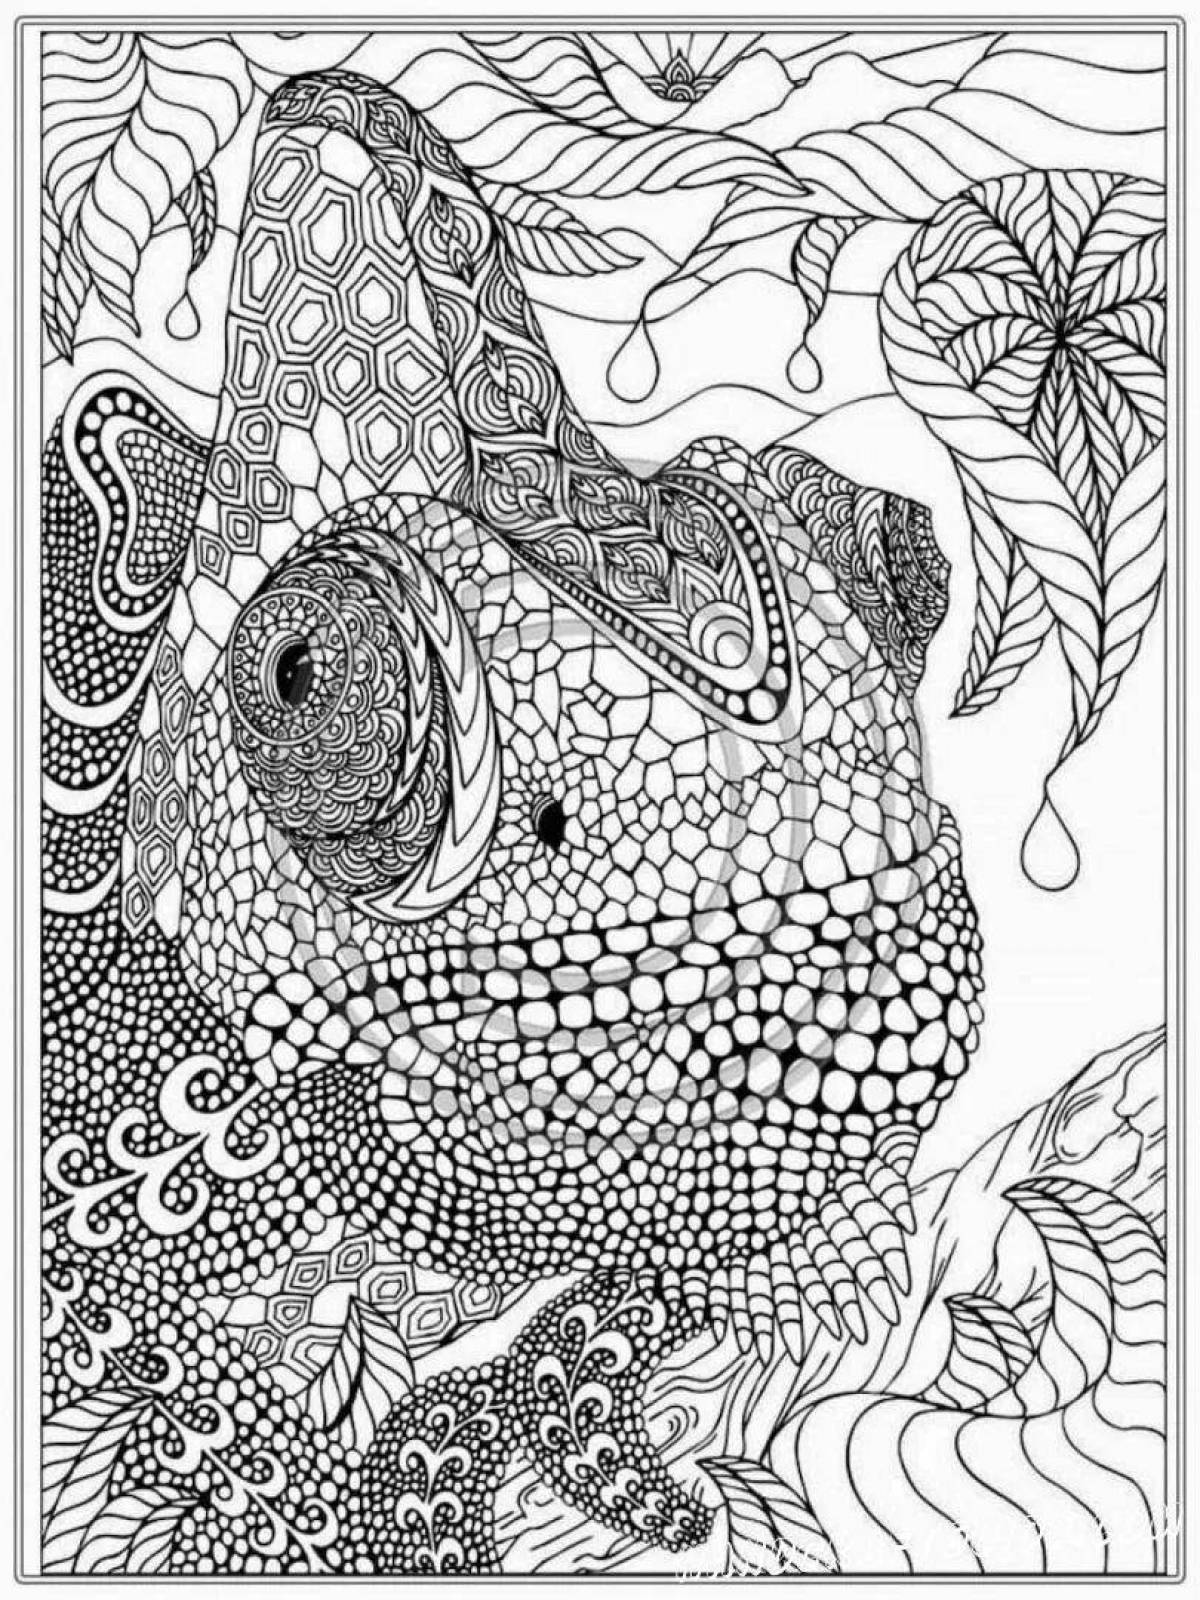 Amazing adult coloring book